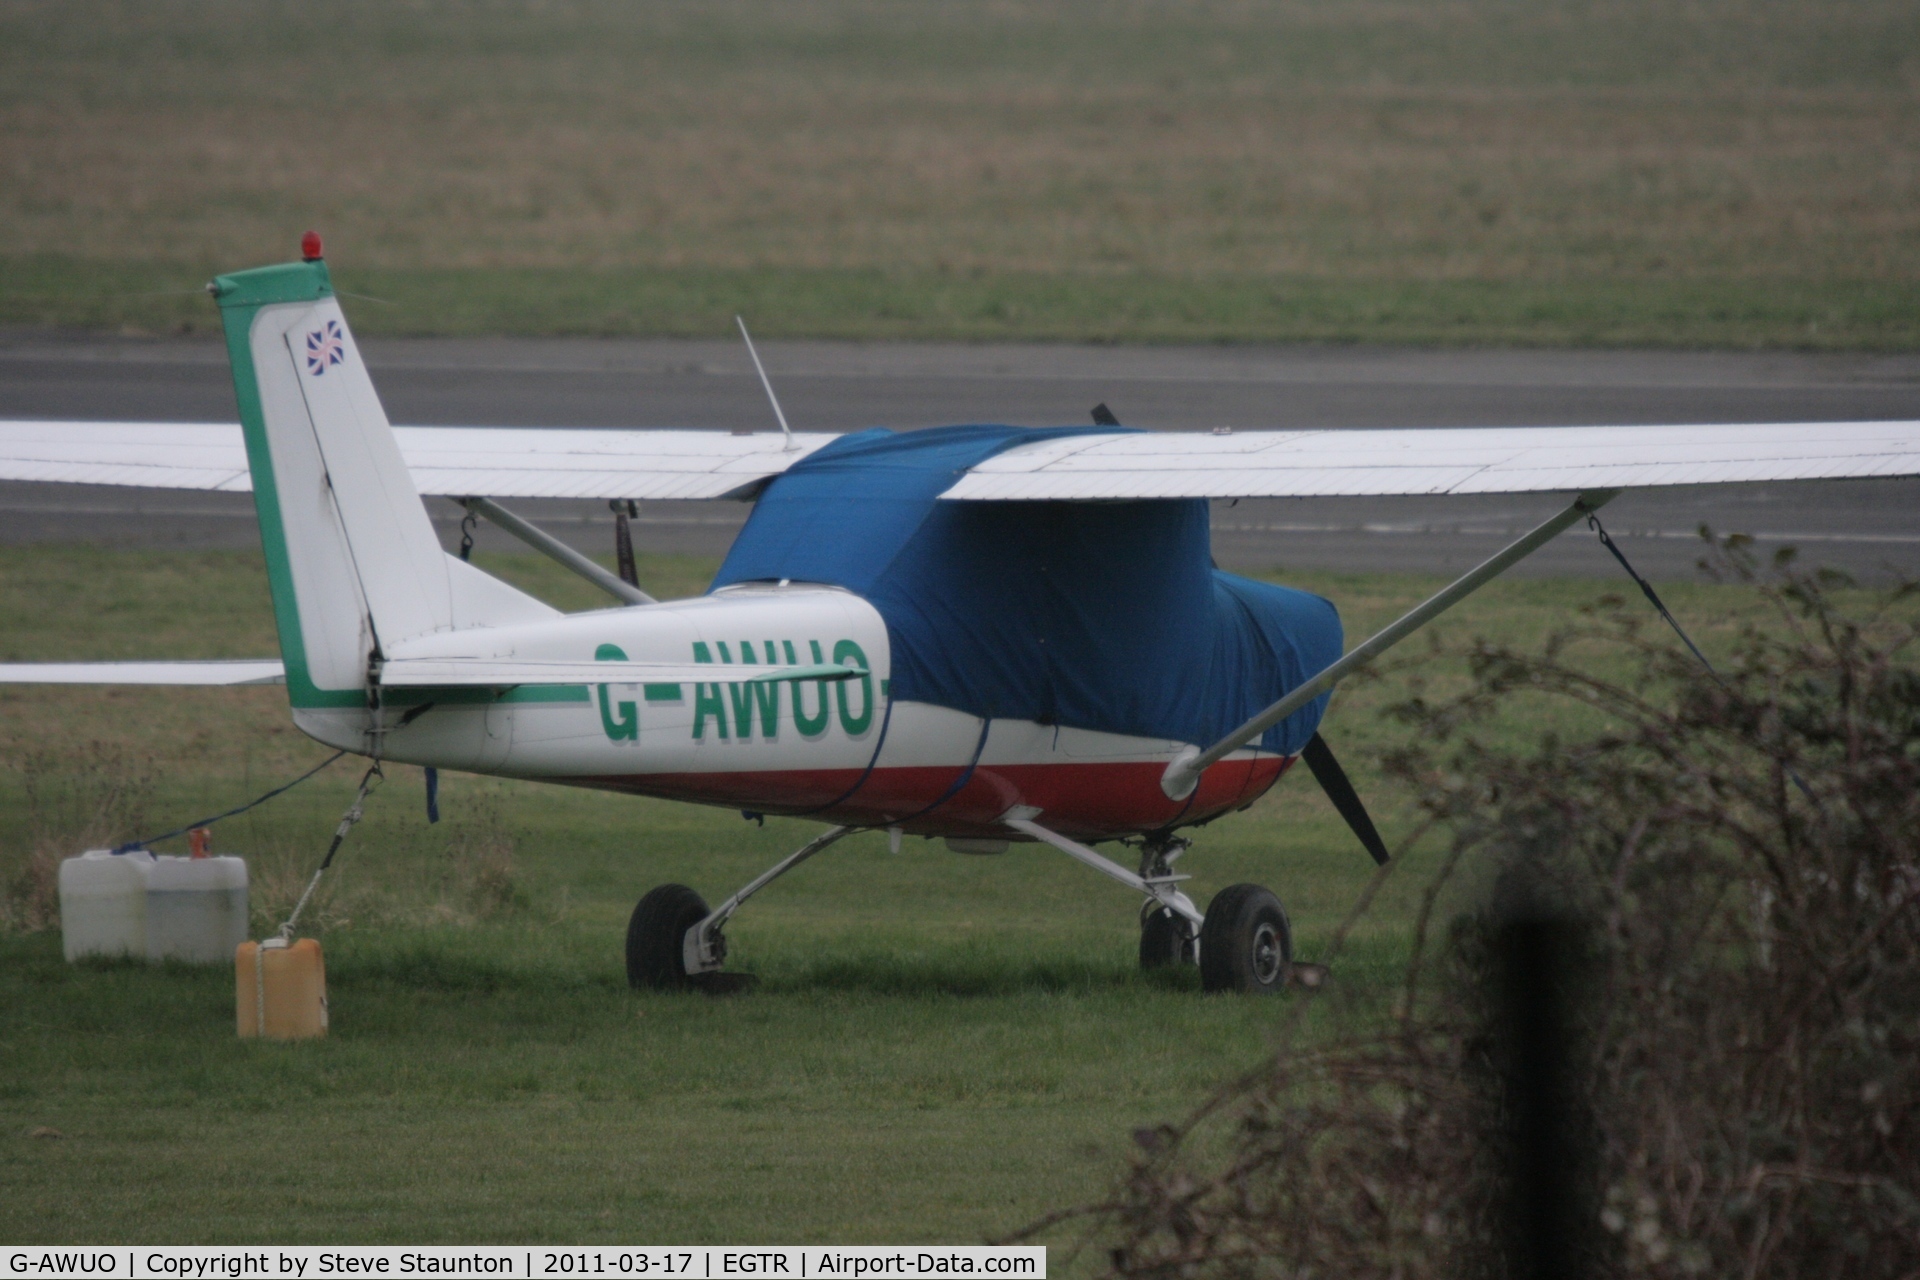 G-AWUO, 1968 Reims F150H C/N 0380, Taken at Elstree Airfield March 2011